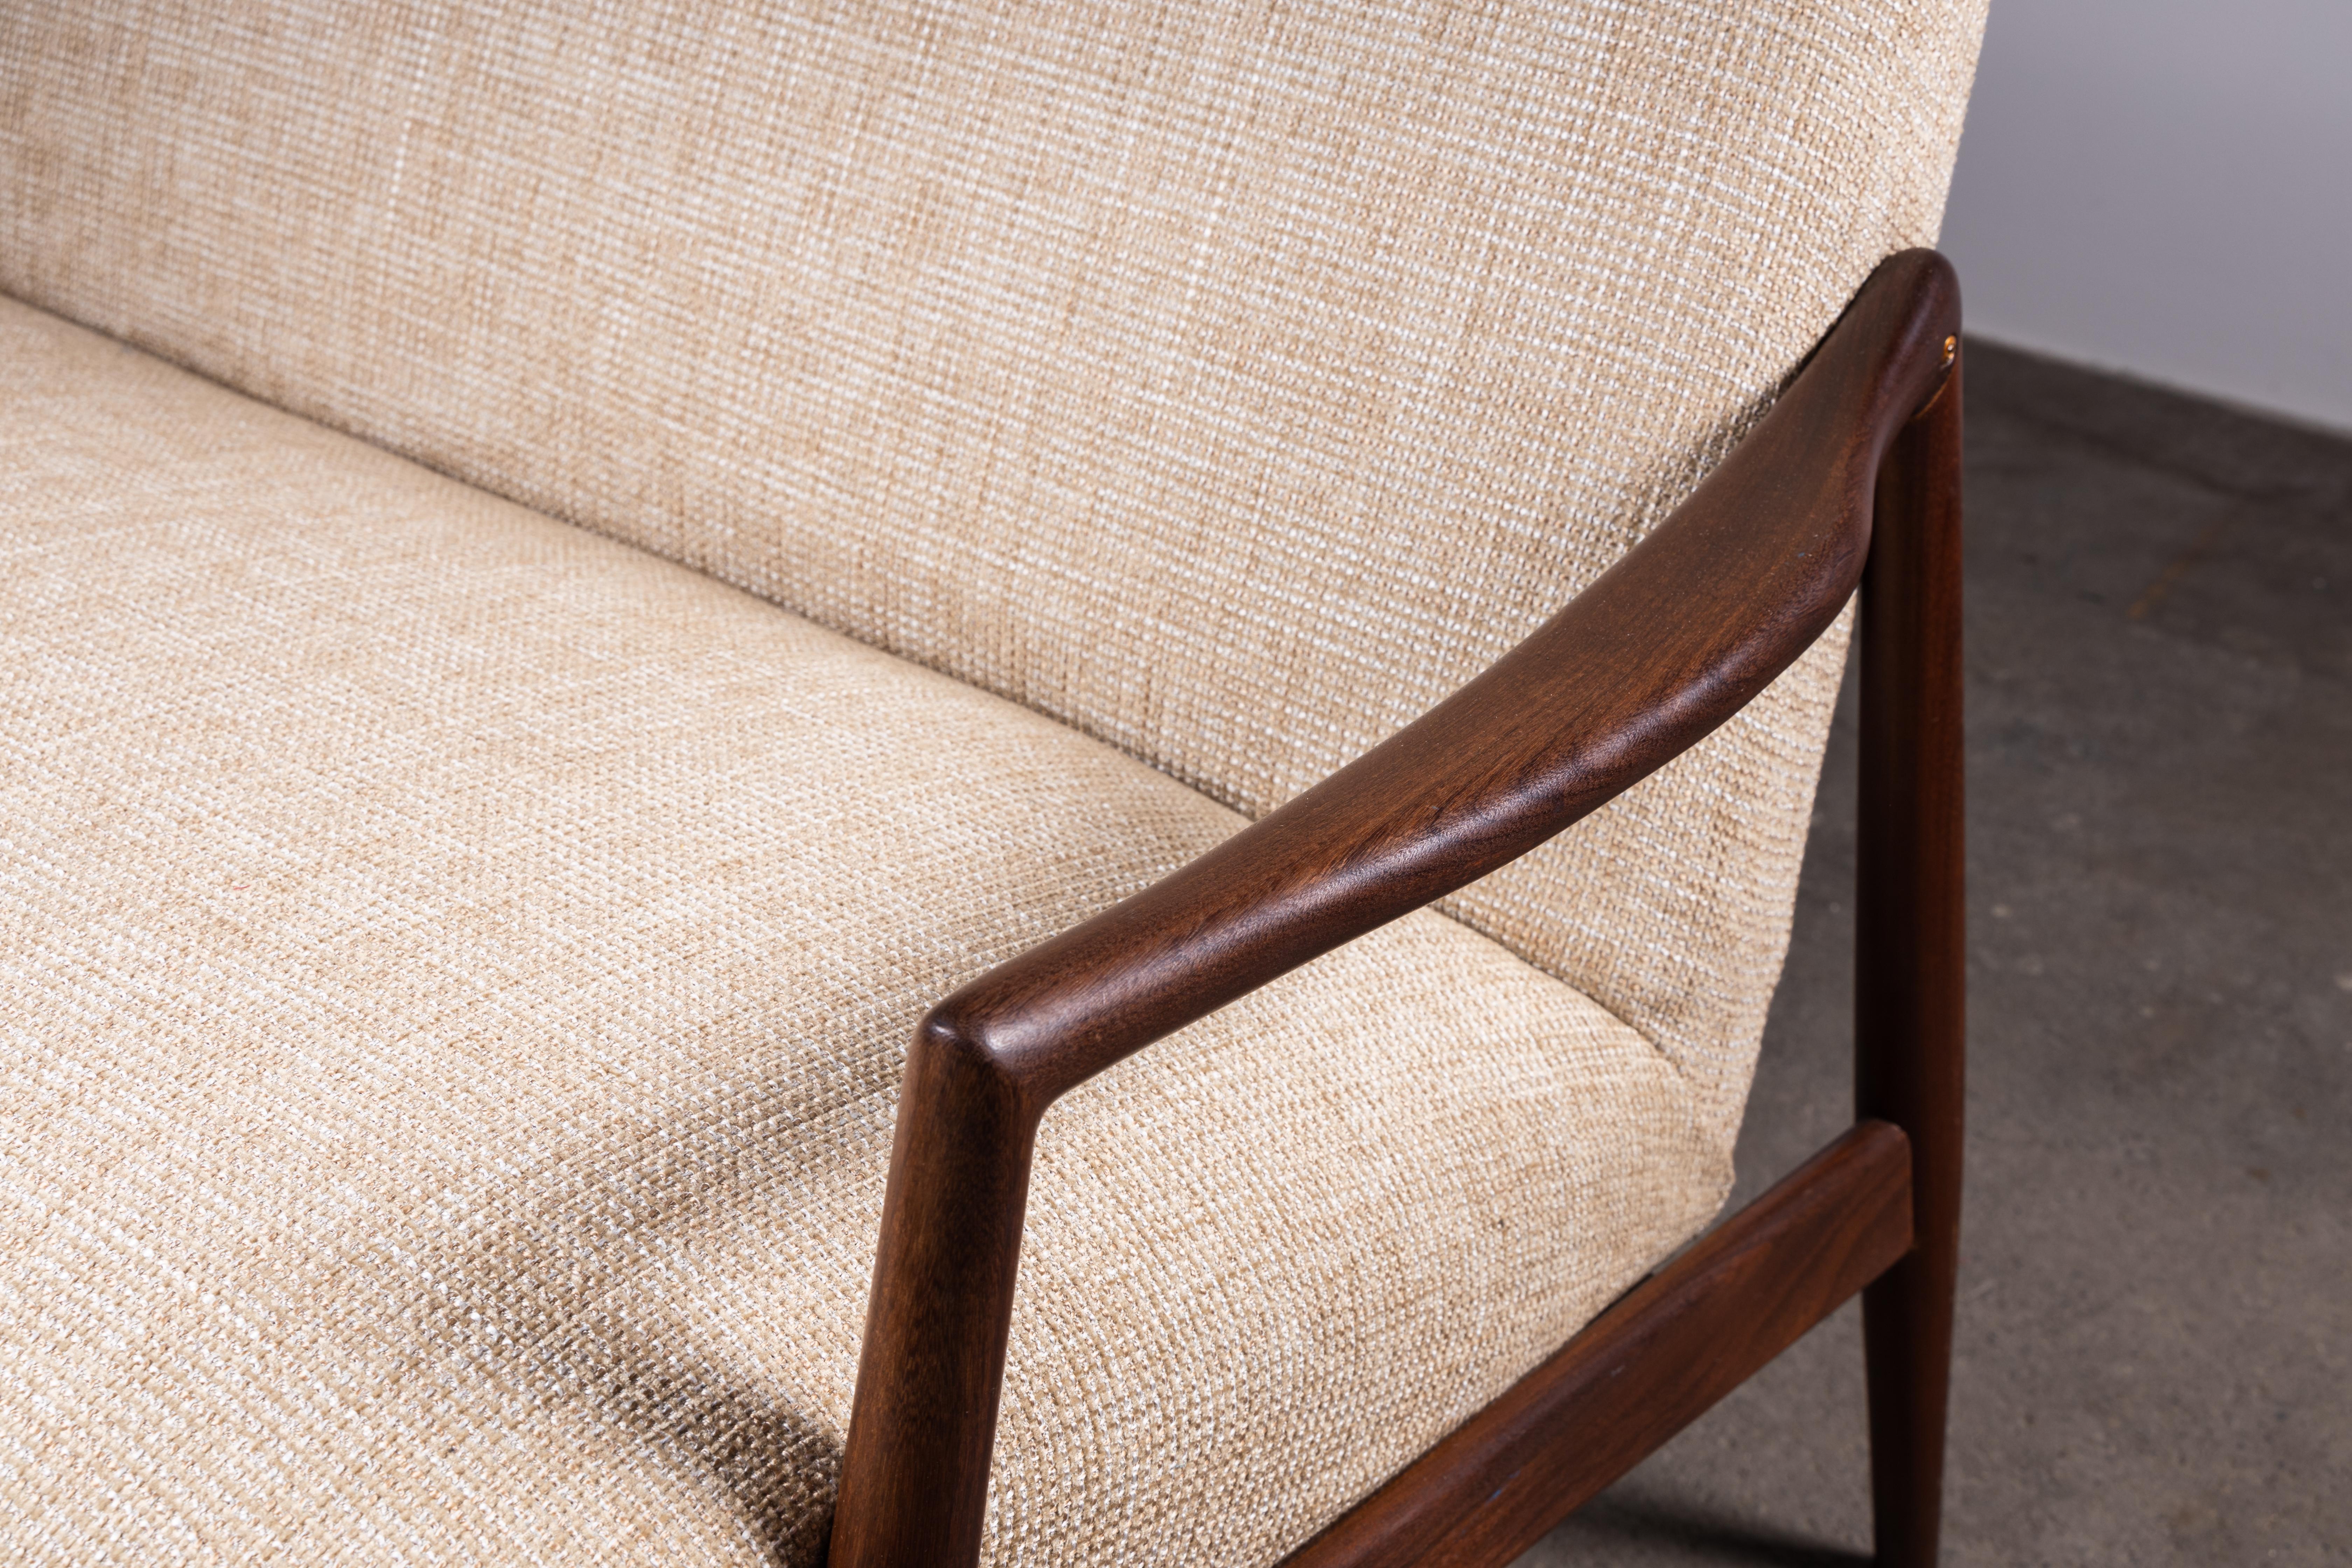 Fabric High-Back 1950s Teak Armchair by Lohmeyer upholstered à la Coco Chanel